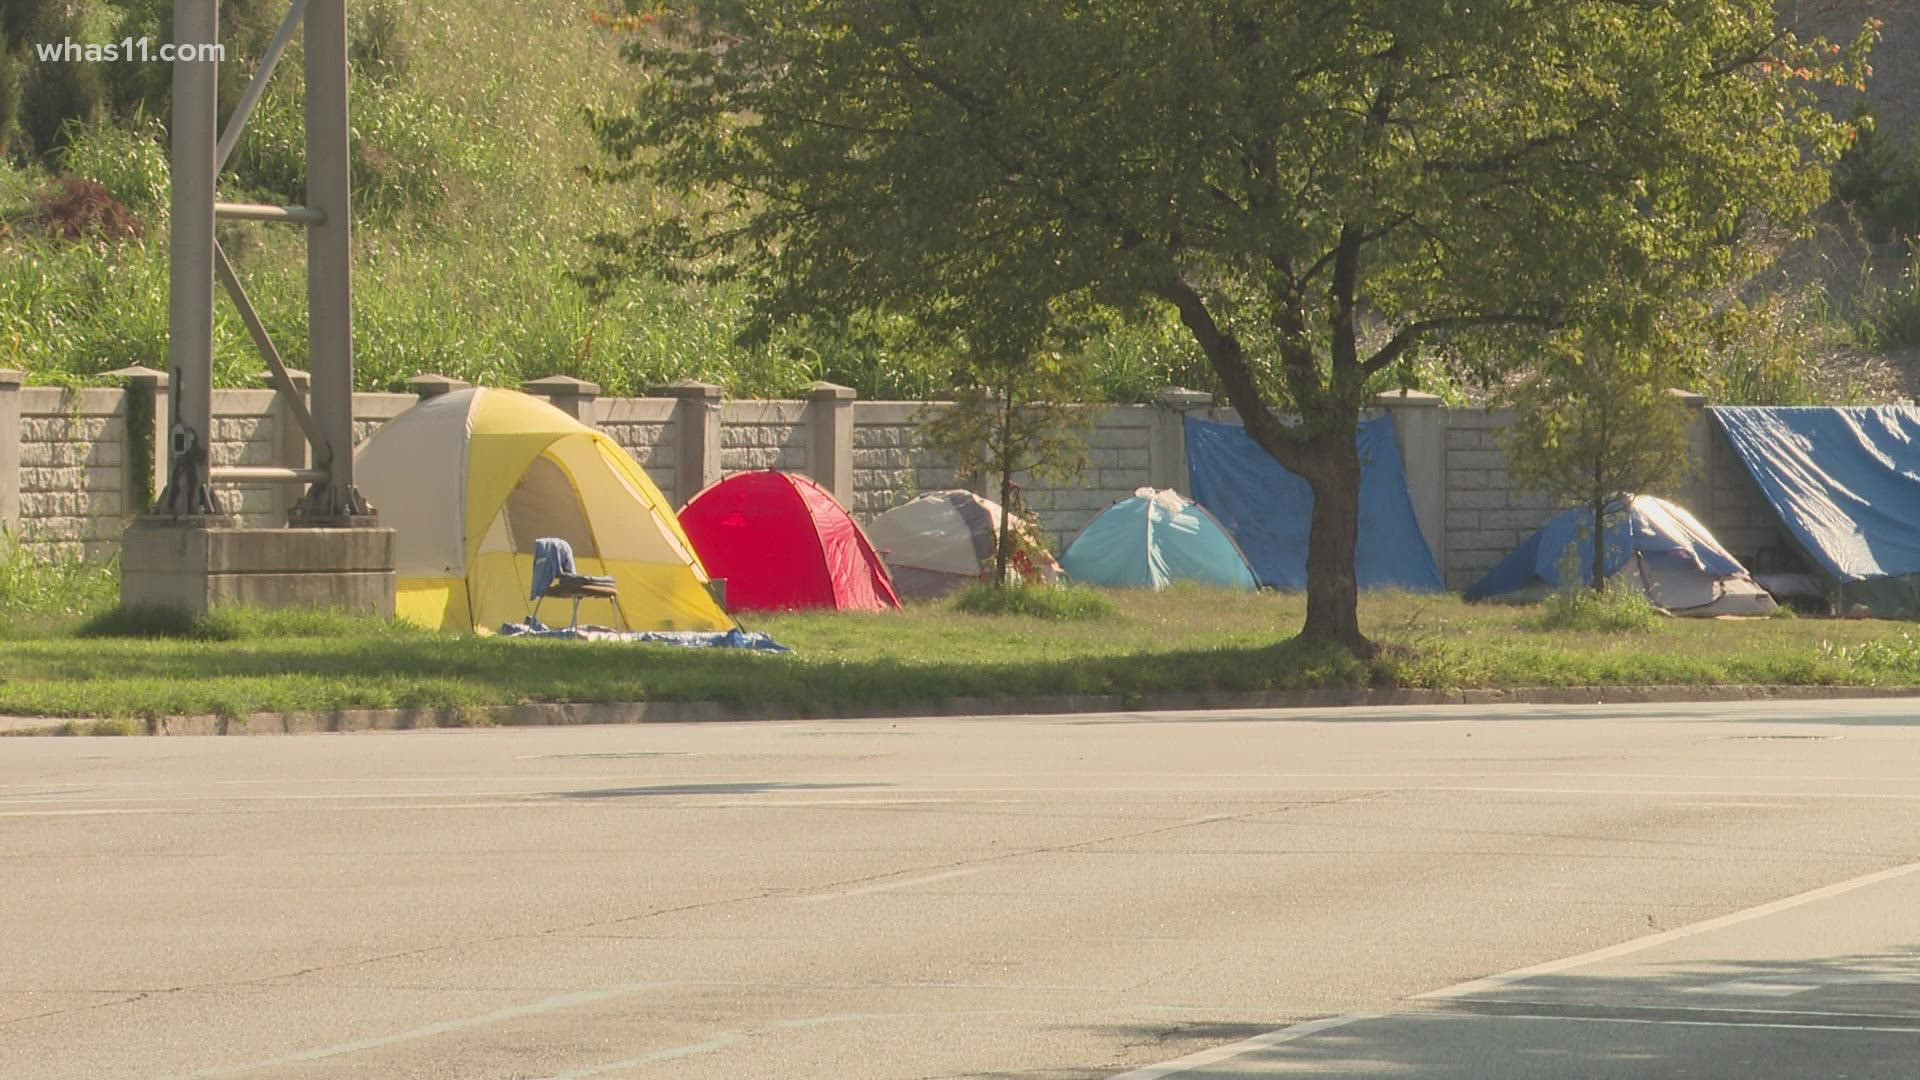 The homeless encampments in a 6 to 8-block radius around I-65 downtown have been given a 21-day clear out notice due to unsafe conditions.